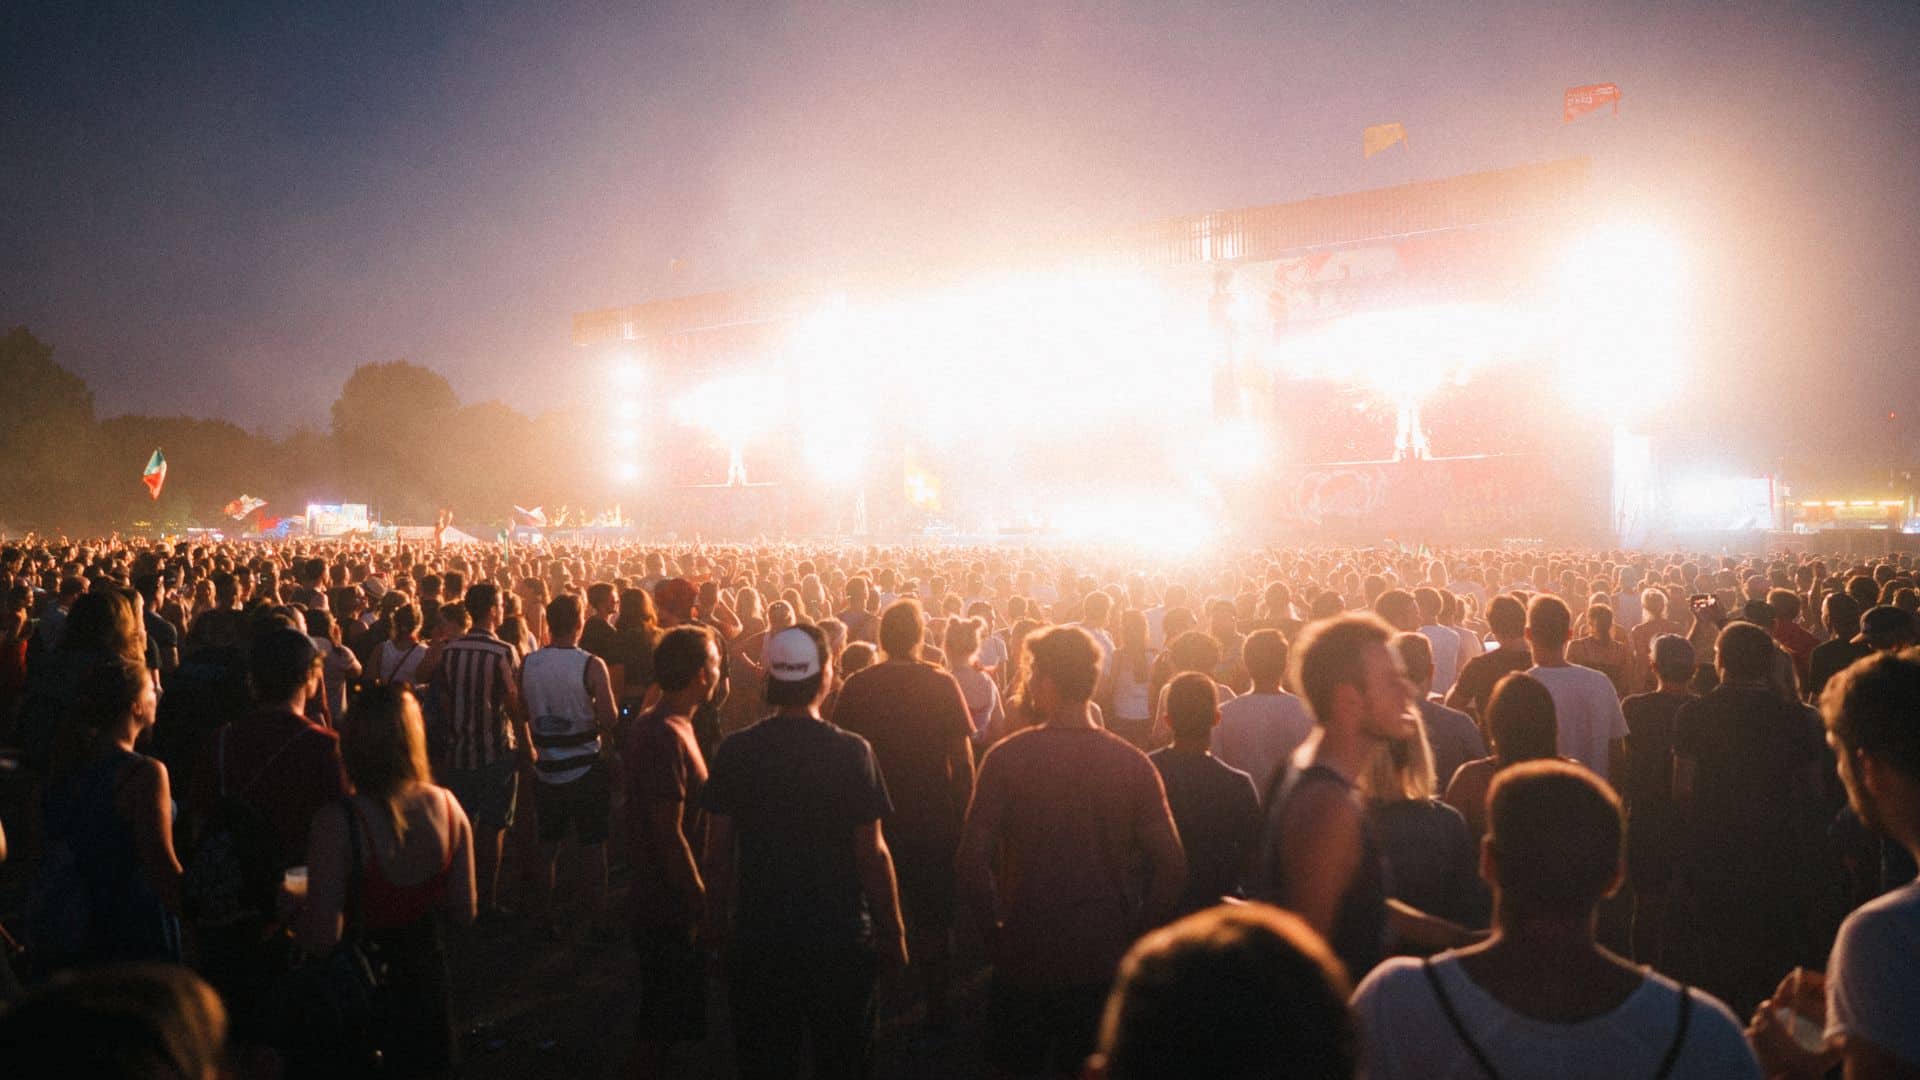 a large crowd of people at an outdoor music festival. the stage shines bright against the dark evening sky.